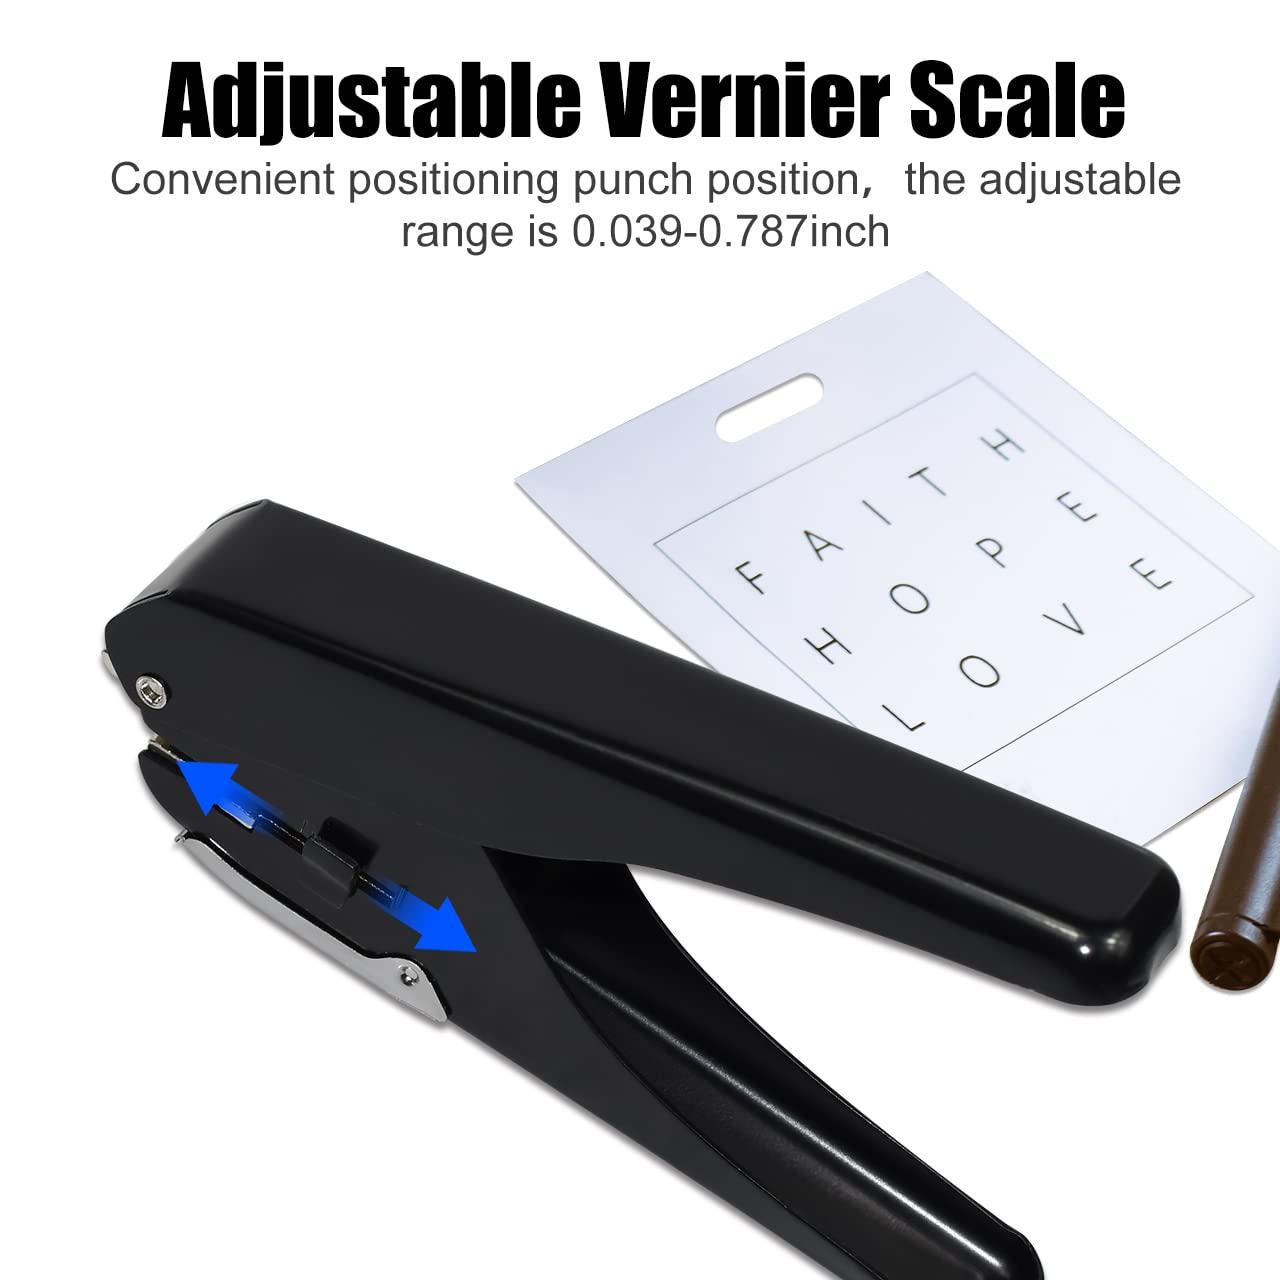 Heavy-Duty Elliptical Punch - Badge Hole Punch for ID Cards, PVC